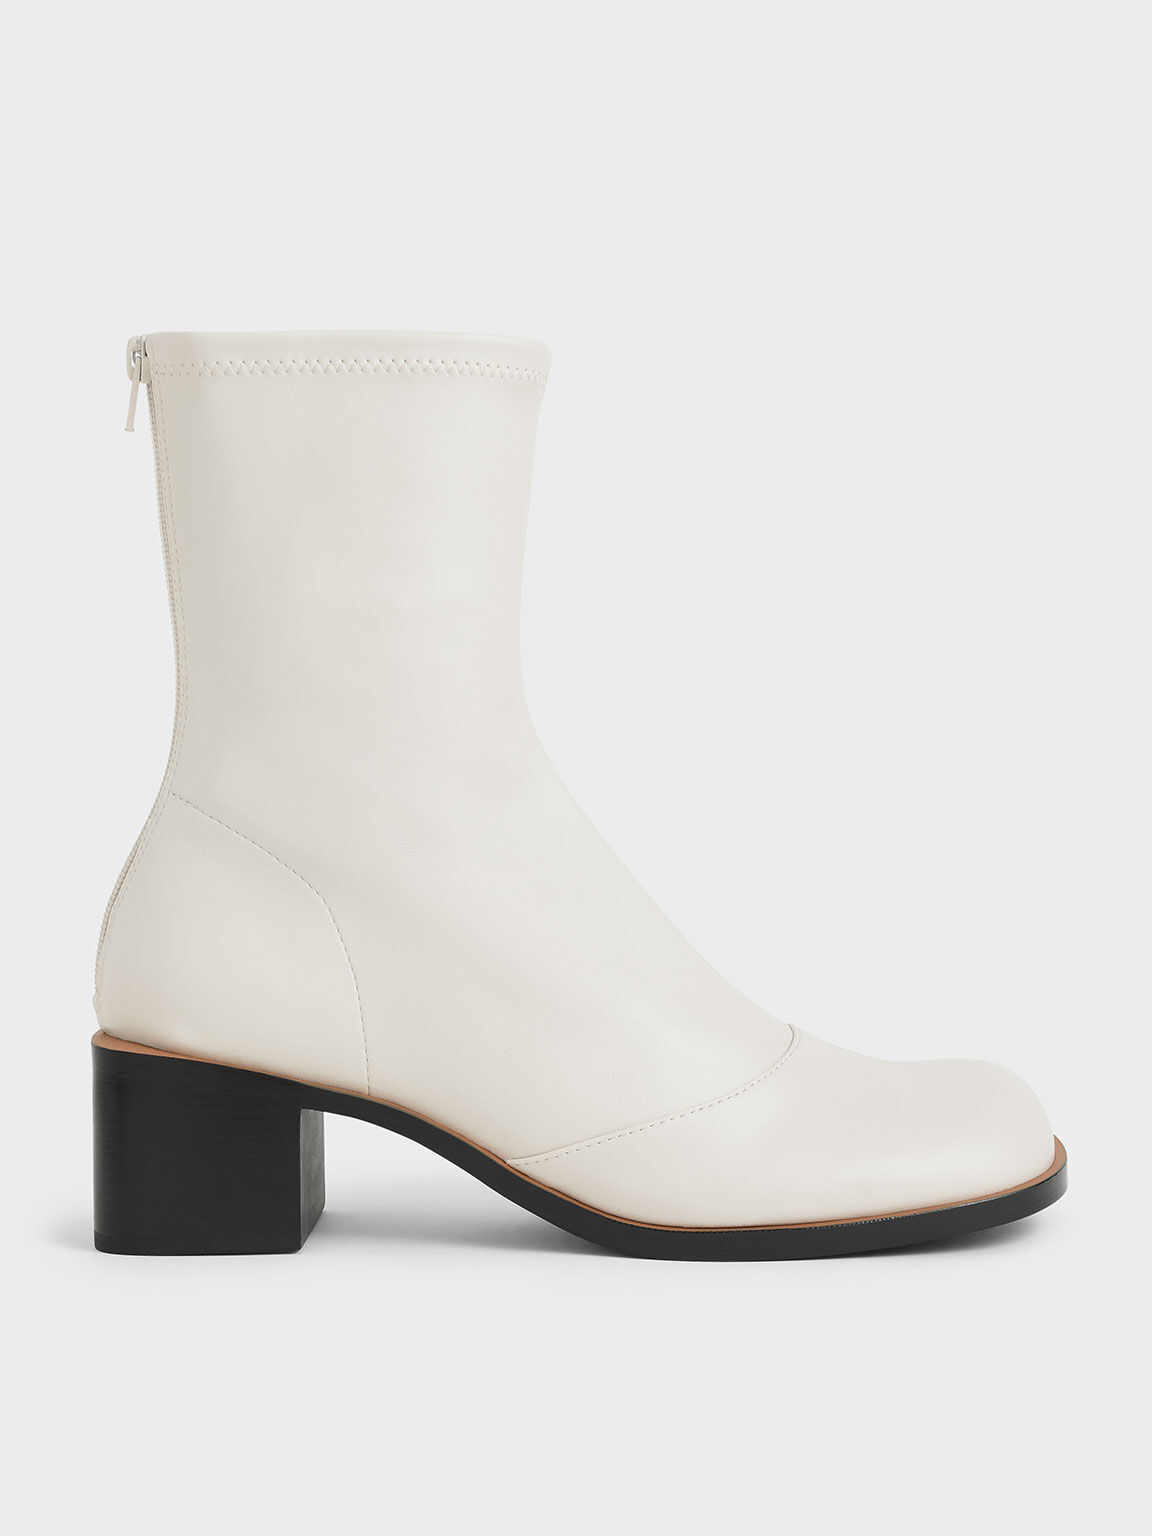 Charles & Keith Stitch Trim Ankle Boots